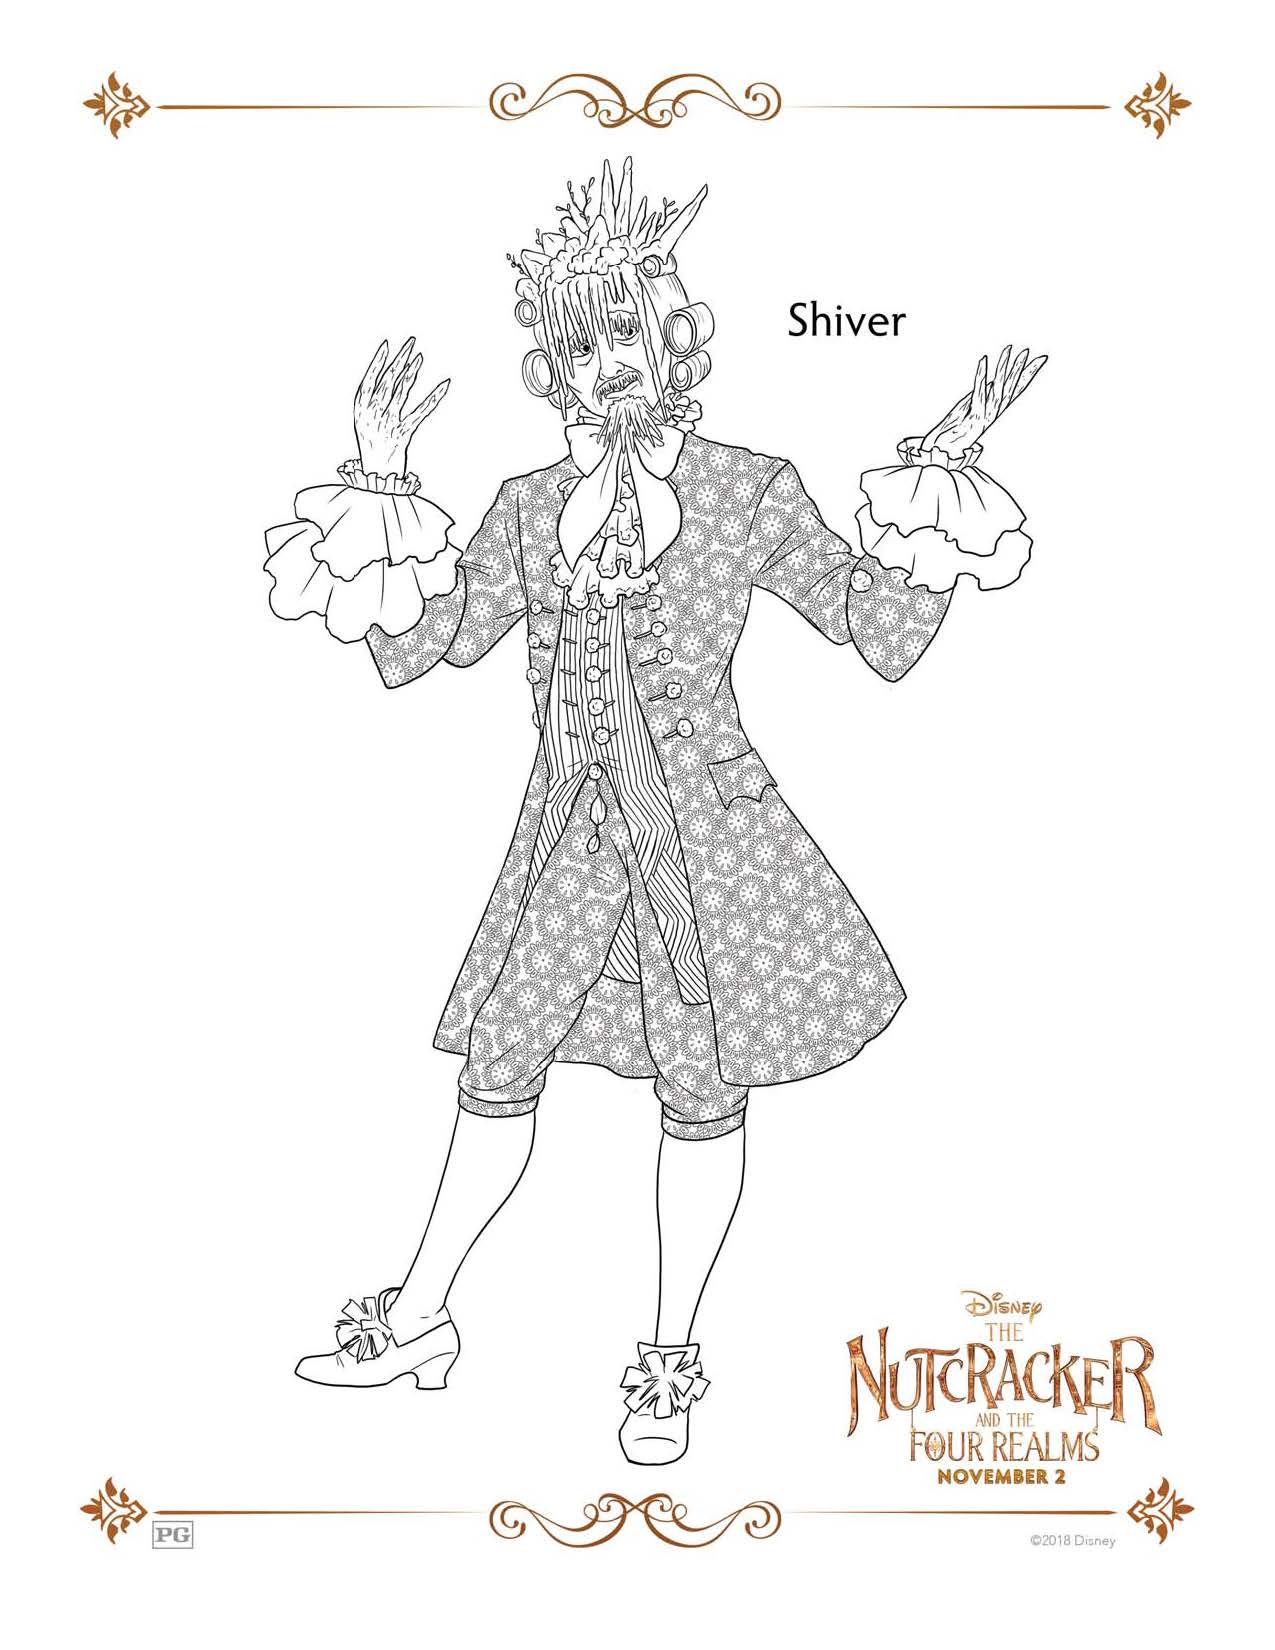 Shiver - The Nutcracker and The Four Realms Coloring Pages and Activity Sheets